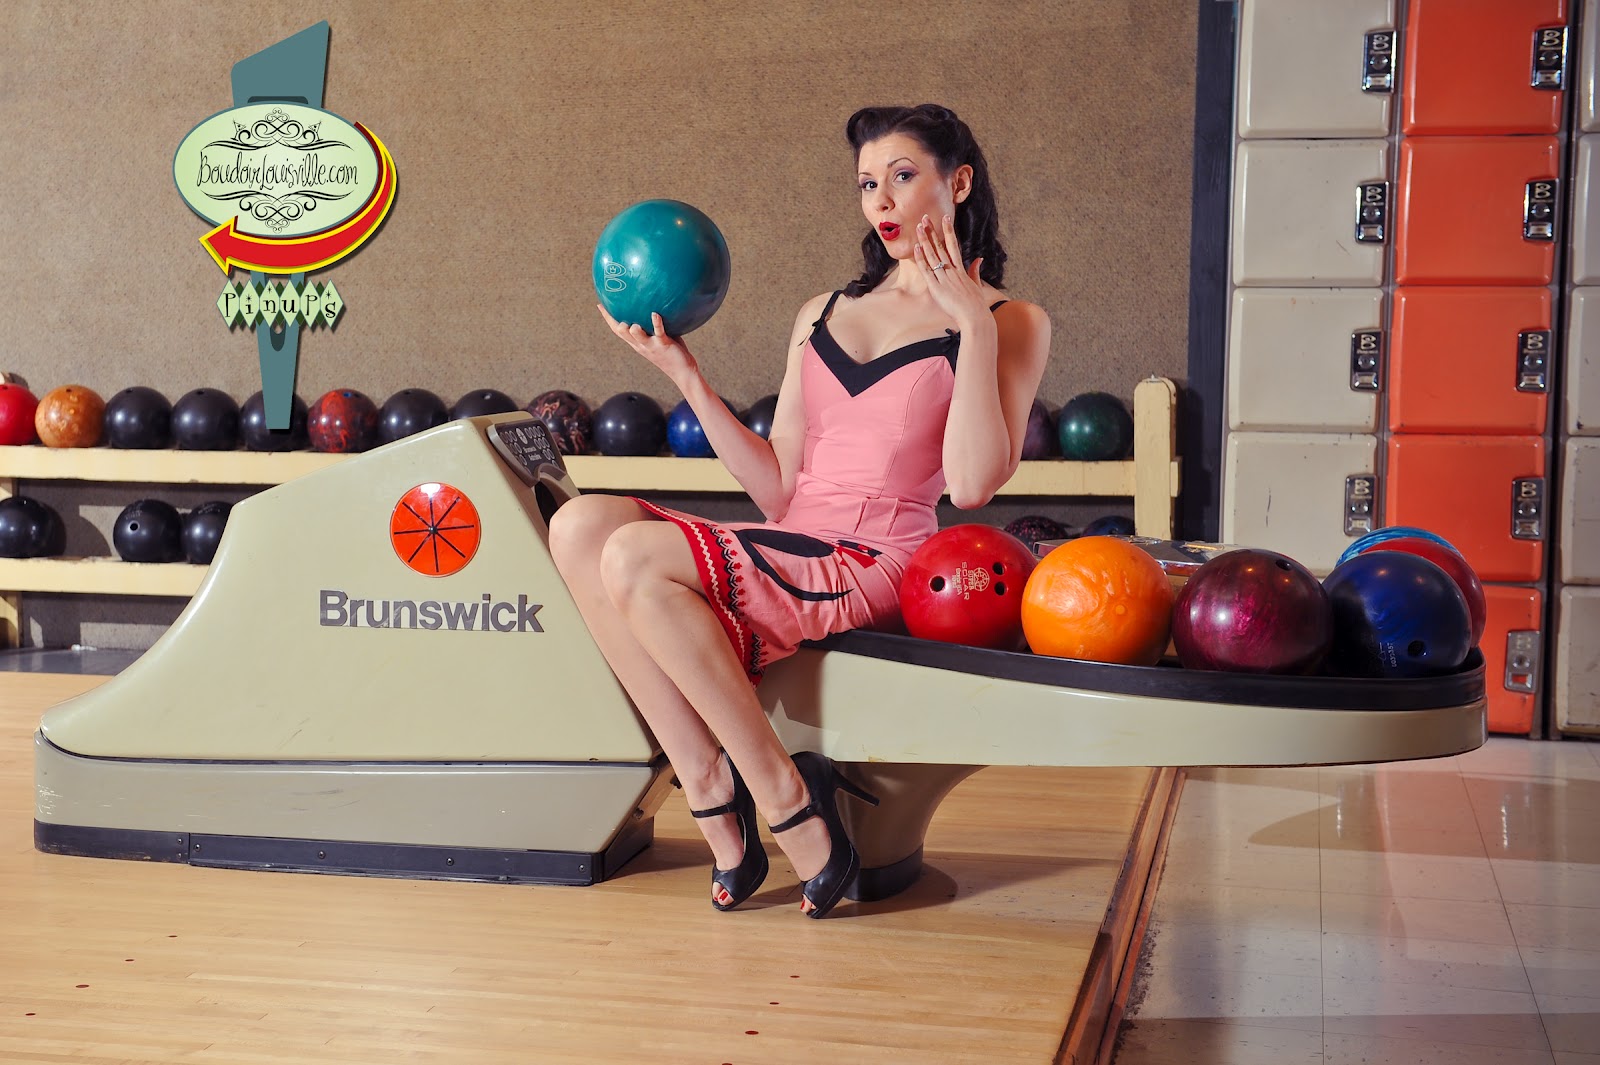 There is a great vintage bowling alley located a few blocks from my house. 